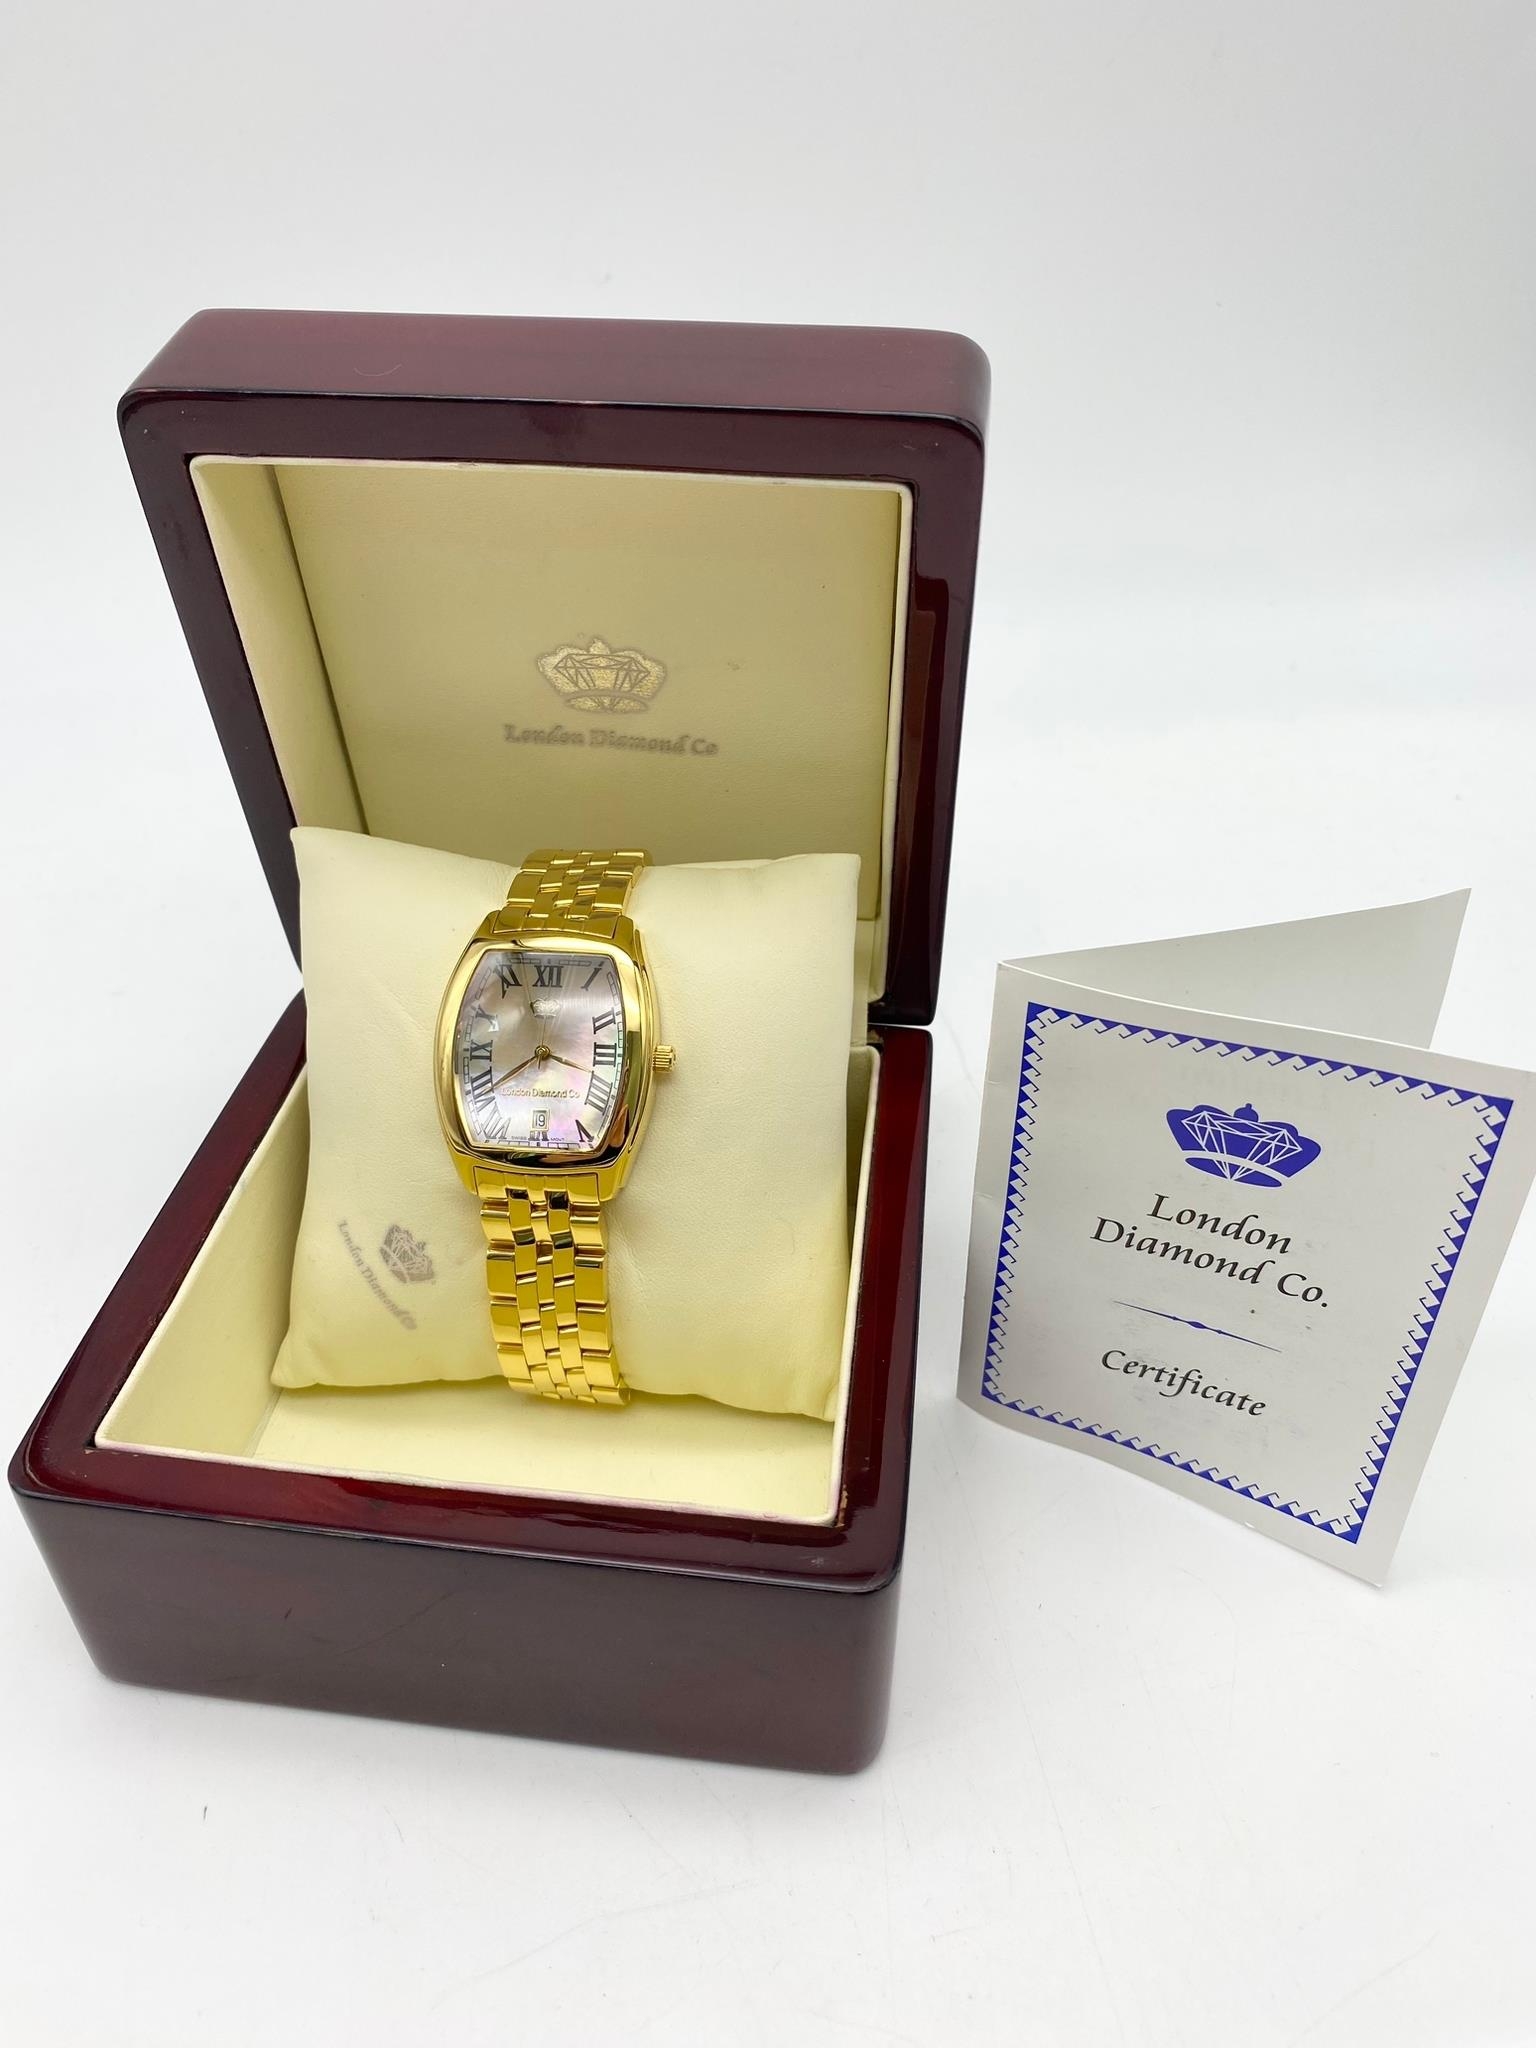 Excellent Condition Limited Edition London Diamond Company 18 Carat Gold Plated, Pearl Faced, Men’ - Image 4 of 4